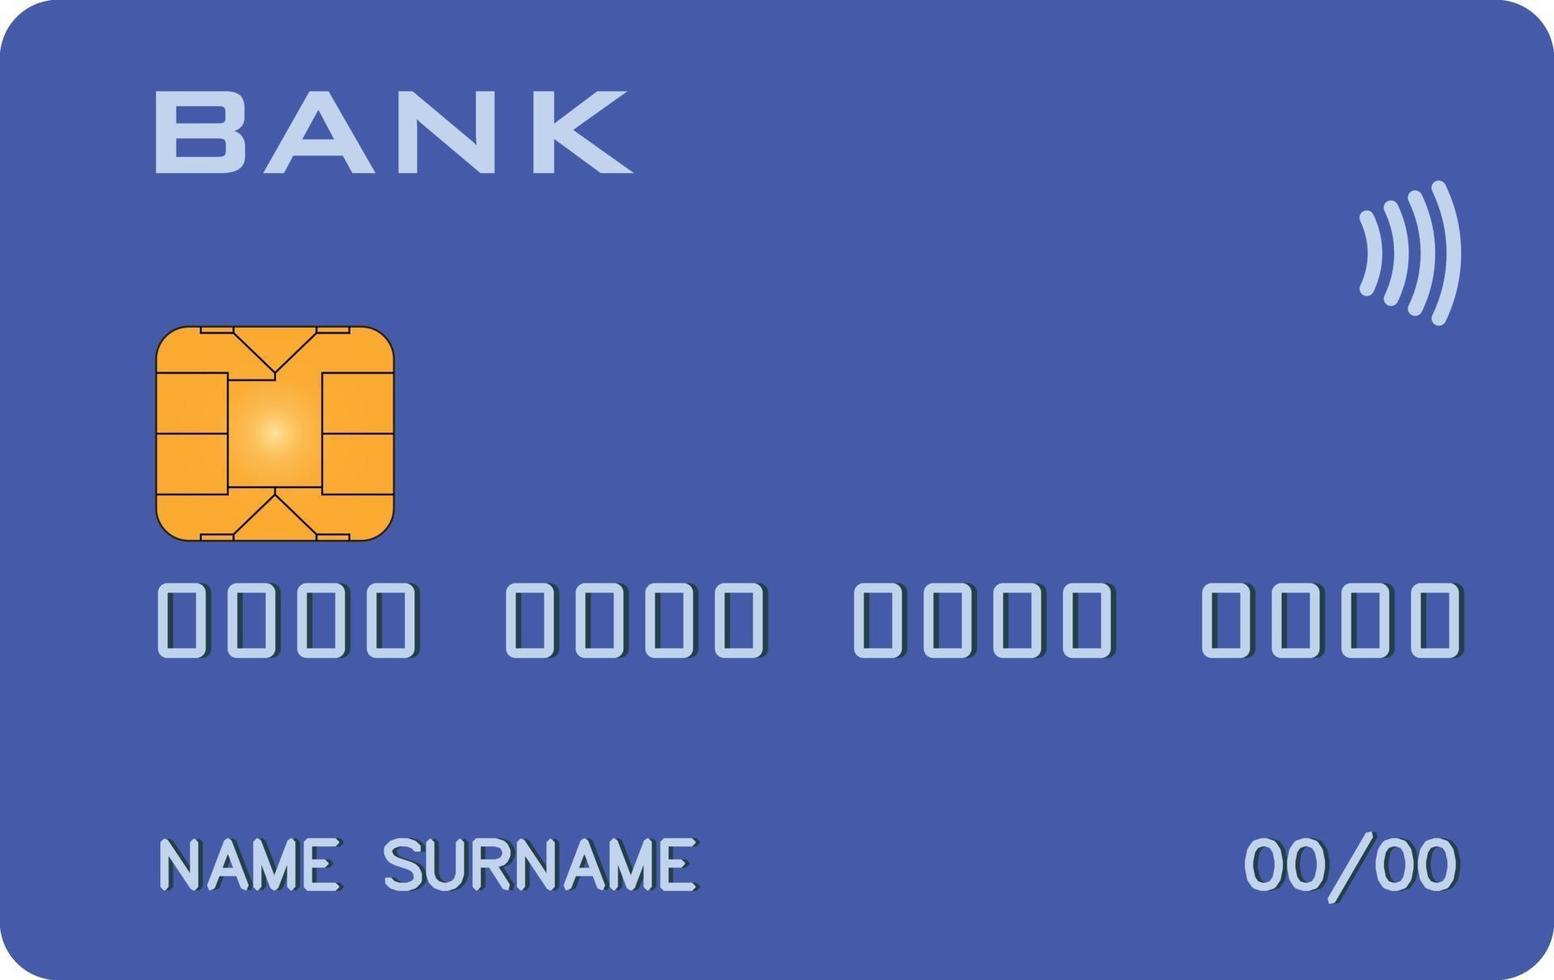 Bank card with PayWave PayPass blue prototype. Abstract bank, abstract payment system vector